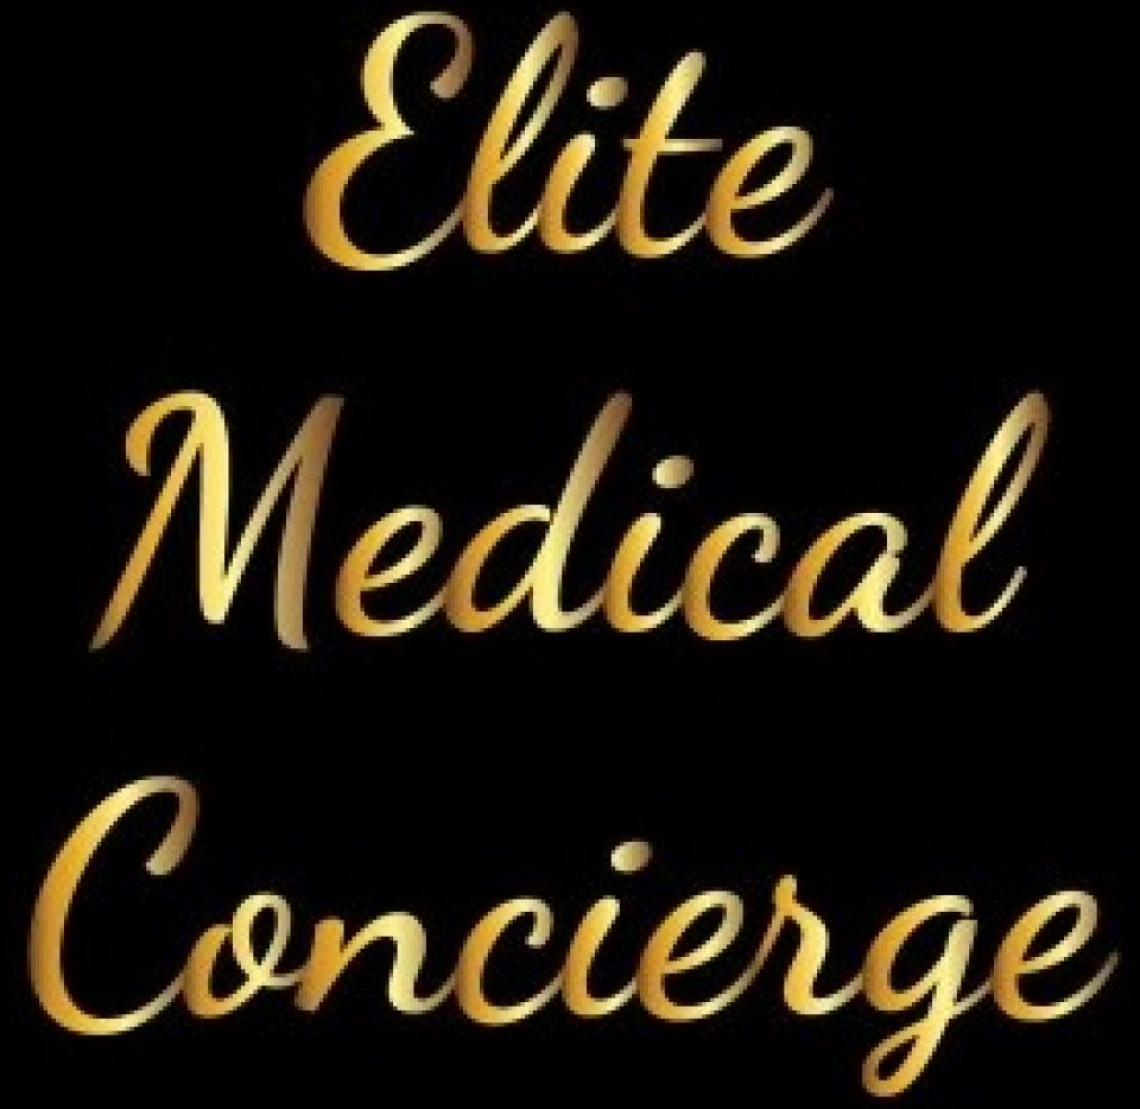 (Primary Care Concierge Physician) Monica Sher, M.D.